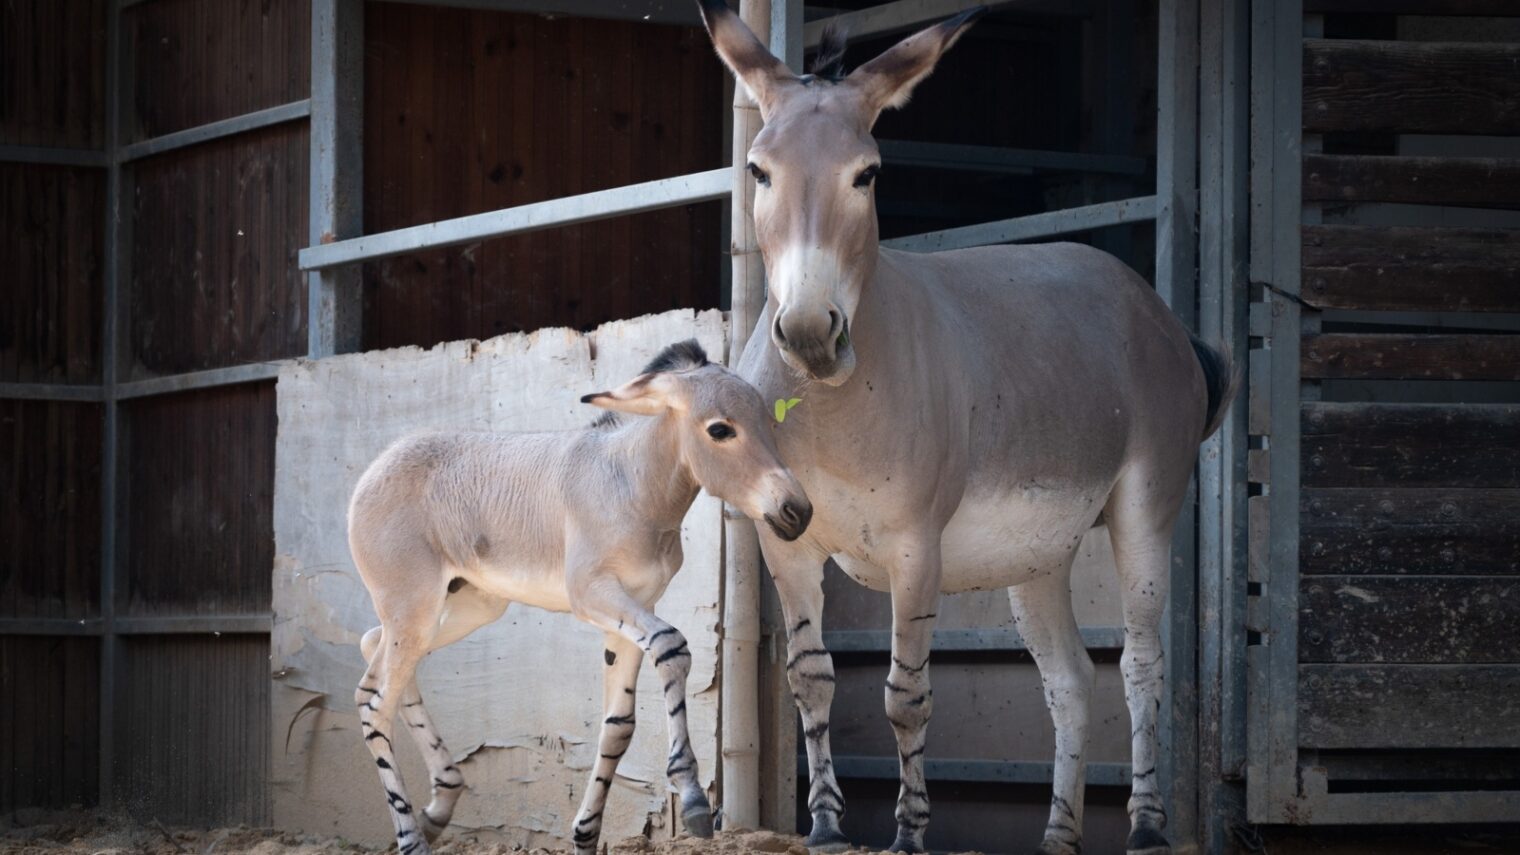 The rare wild African donkey Broko and his mother, Bar, at the Ramat Gan Safari zoological park. Photo by Yam Siton